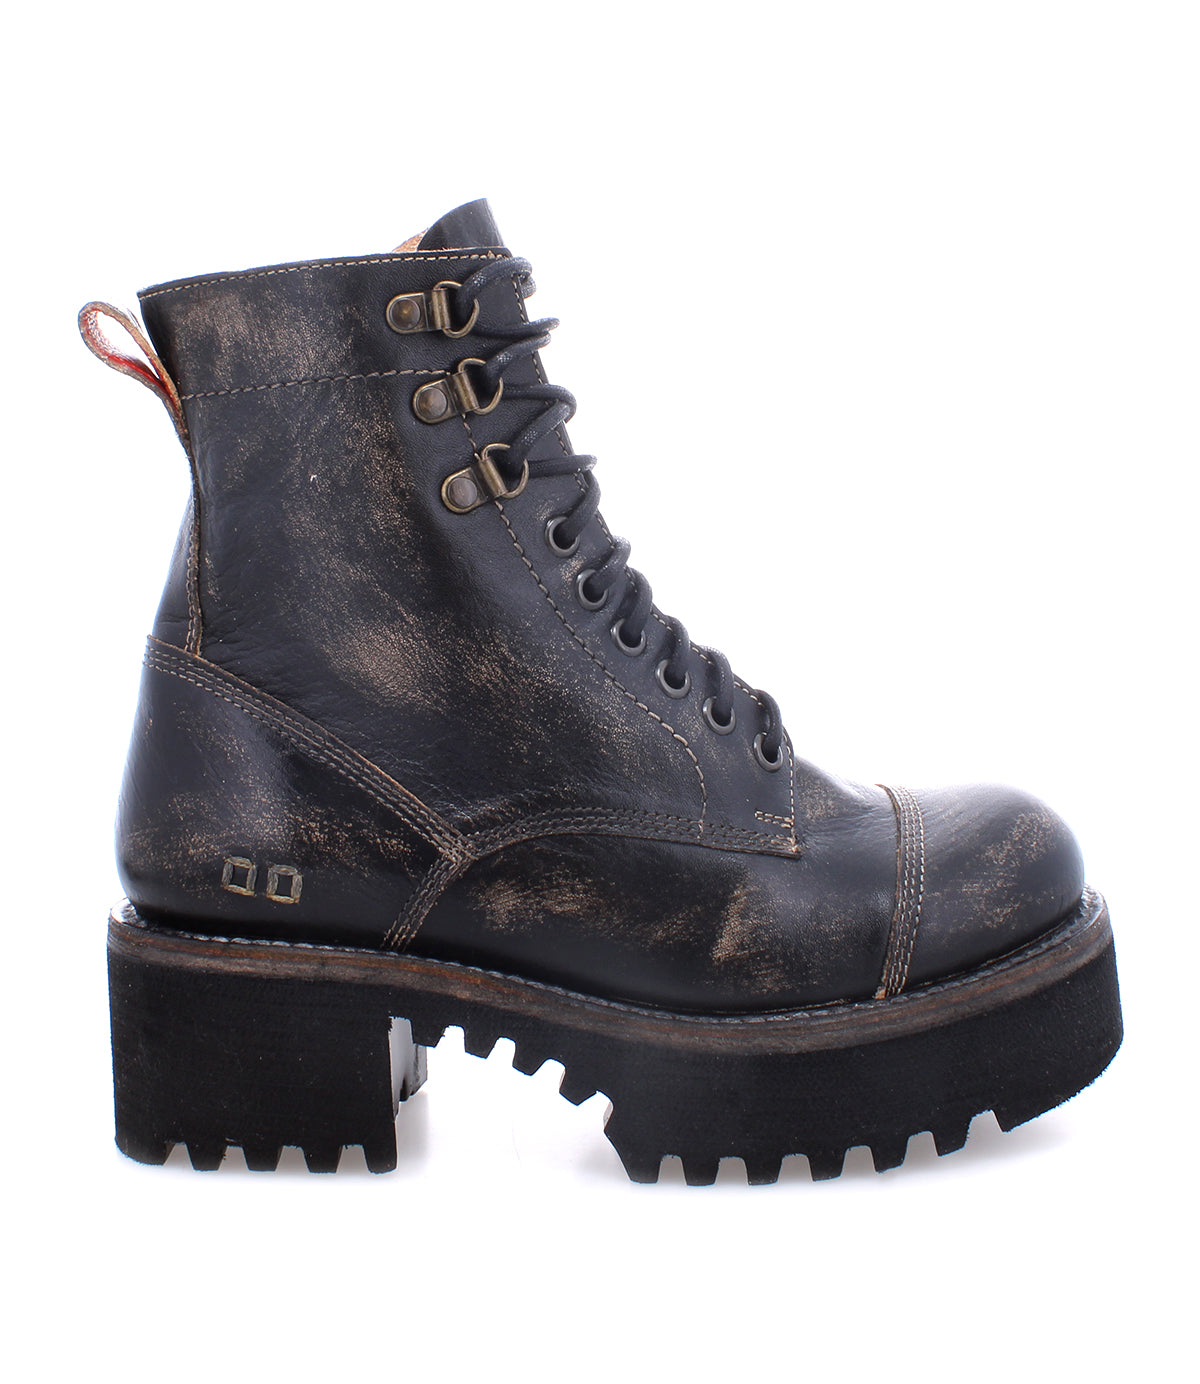 A Bed Stu Prudence Hi lace-up combat boot with a rubber sole.